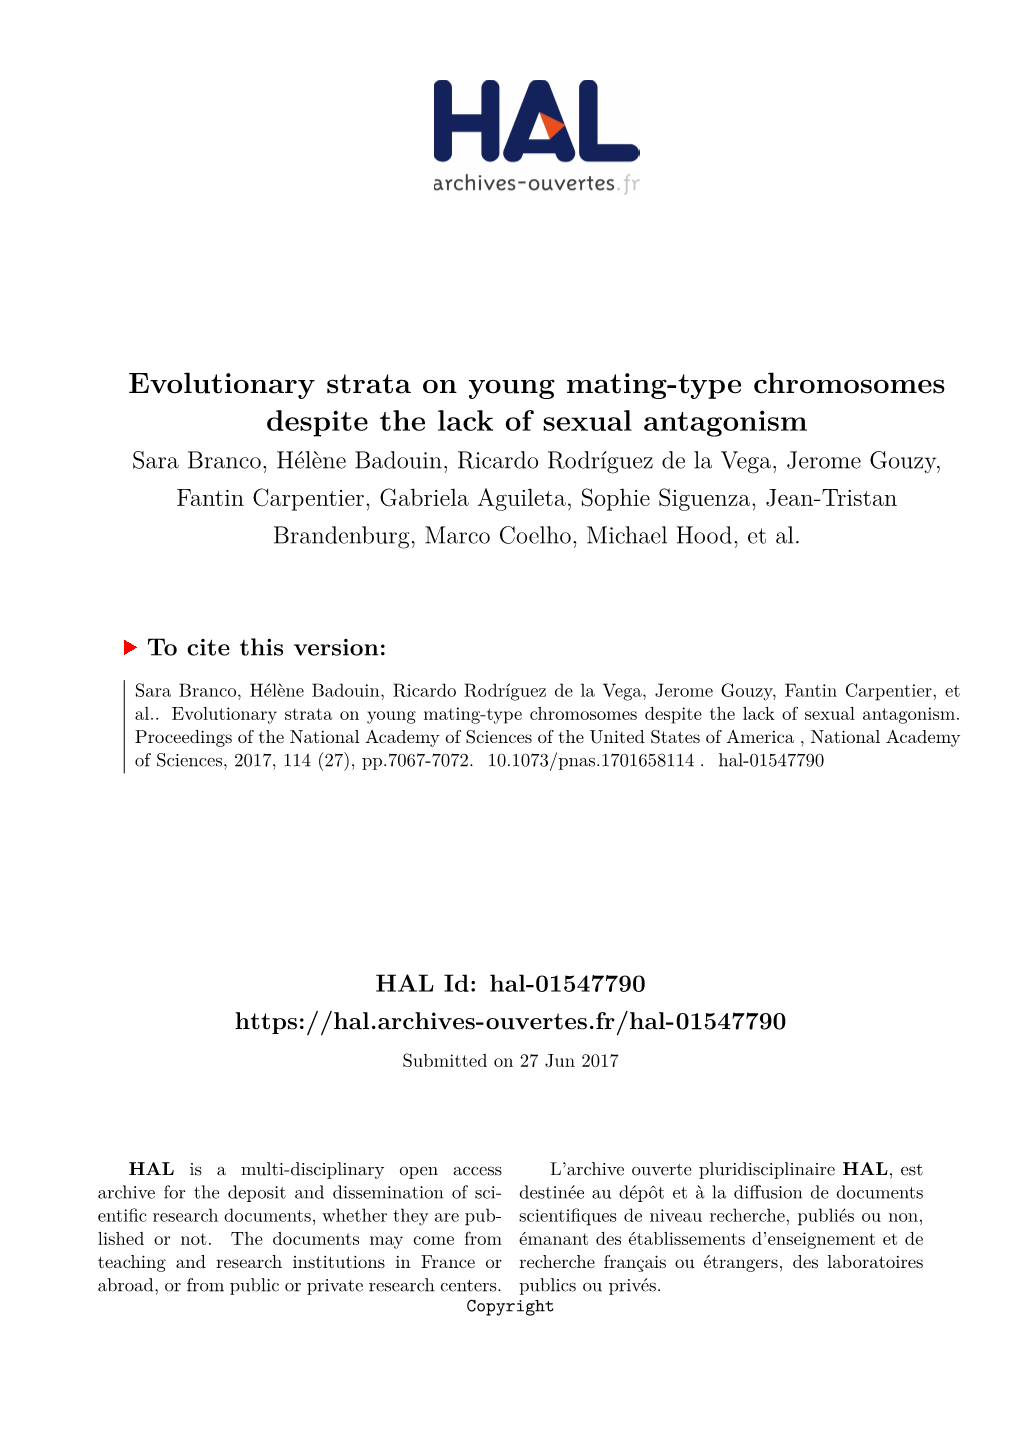 Evolutionary Strata on Young Mating-Type